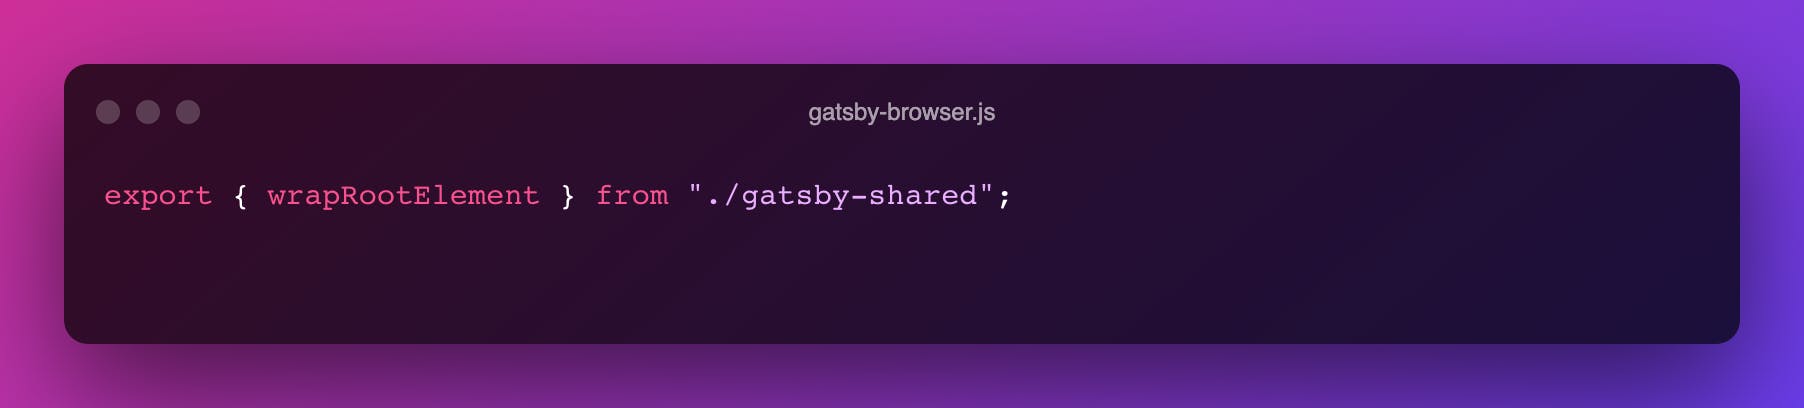 gatsby-browser.js (2).png